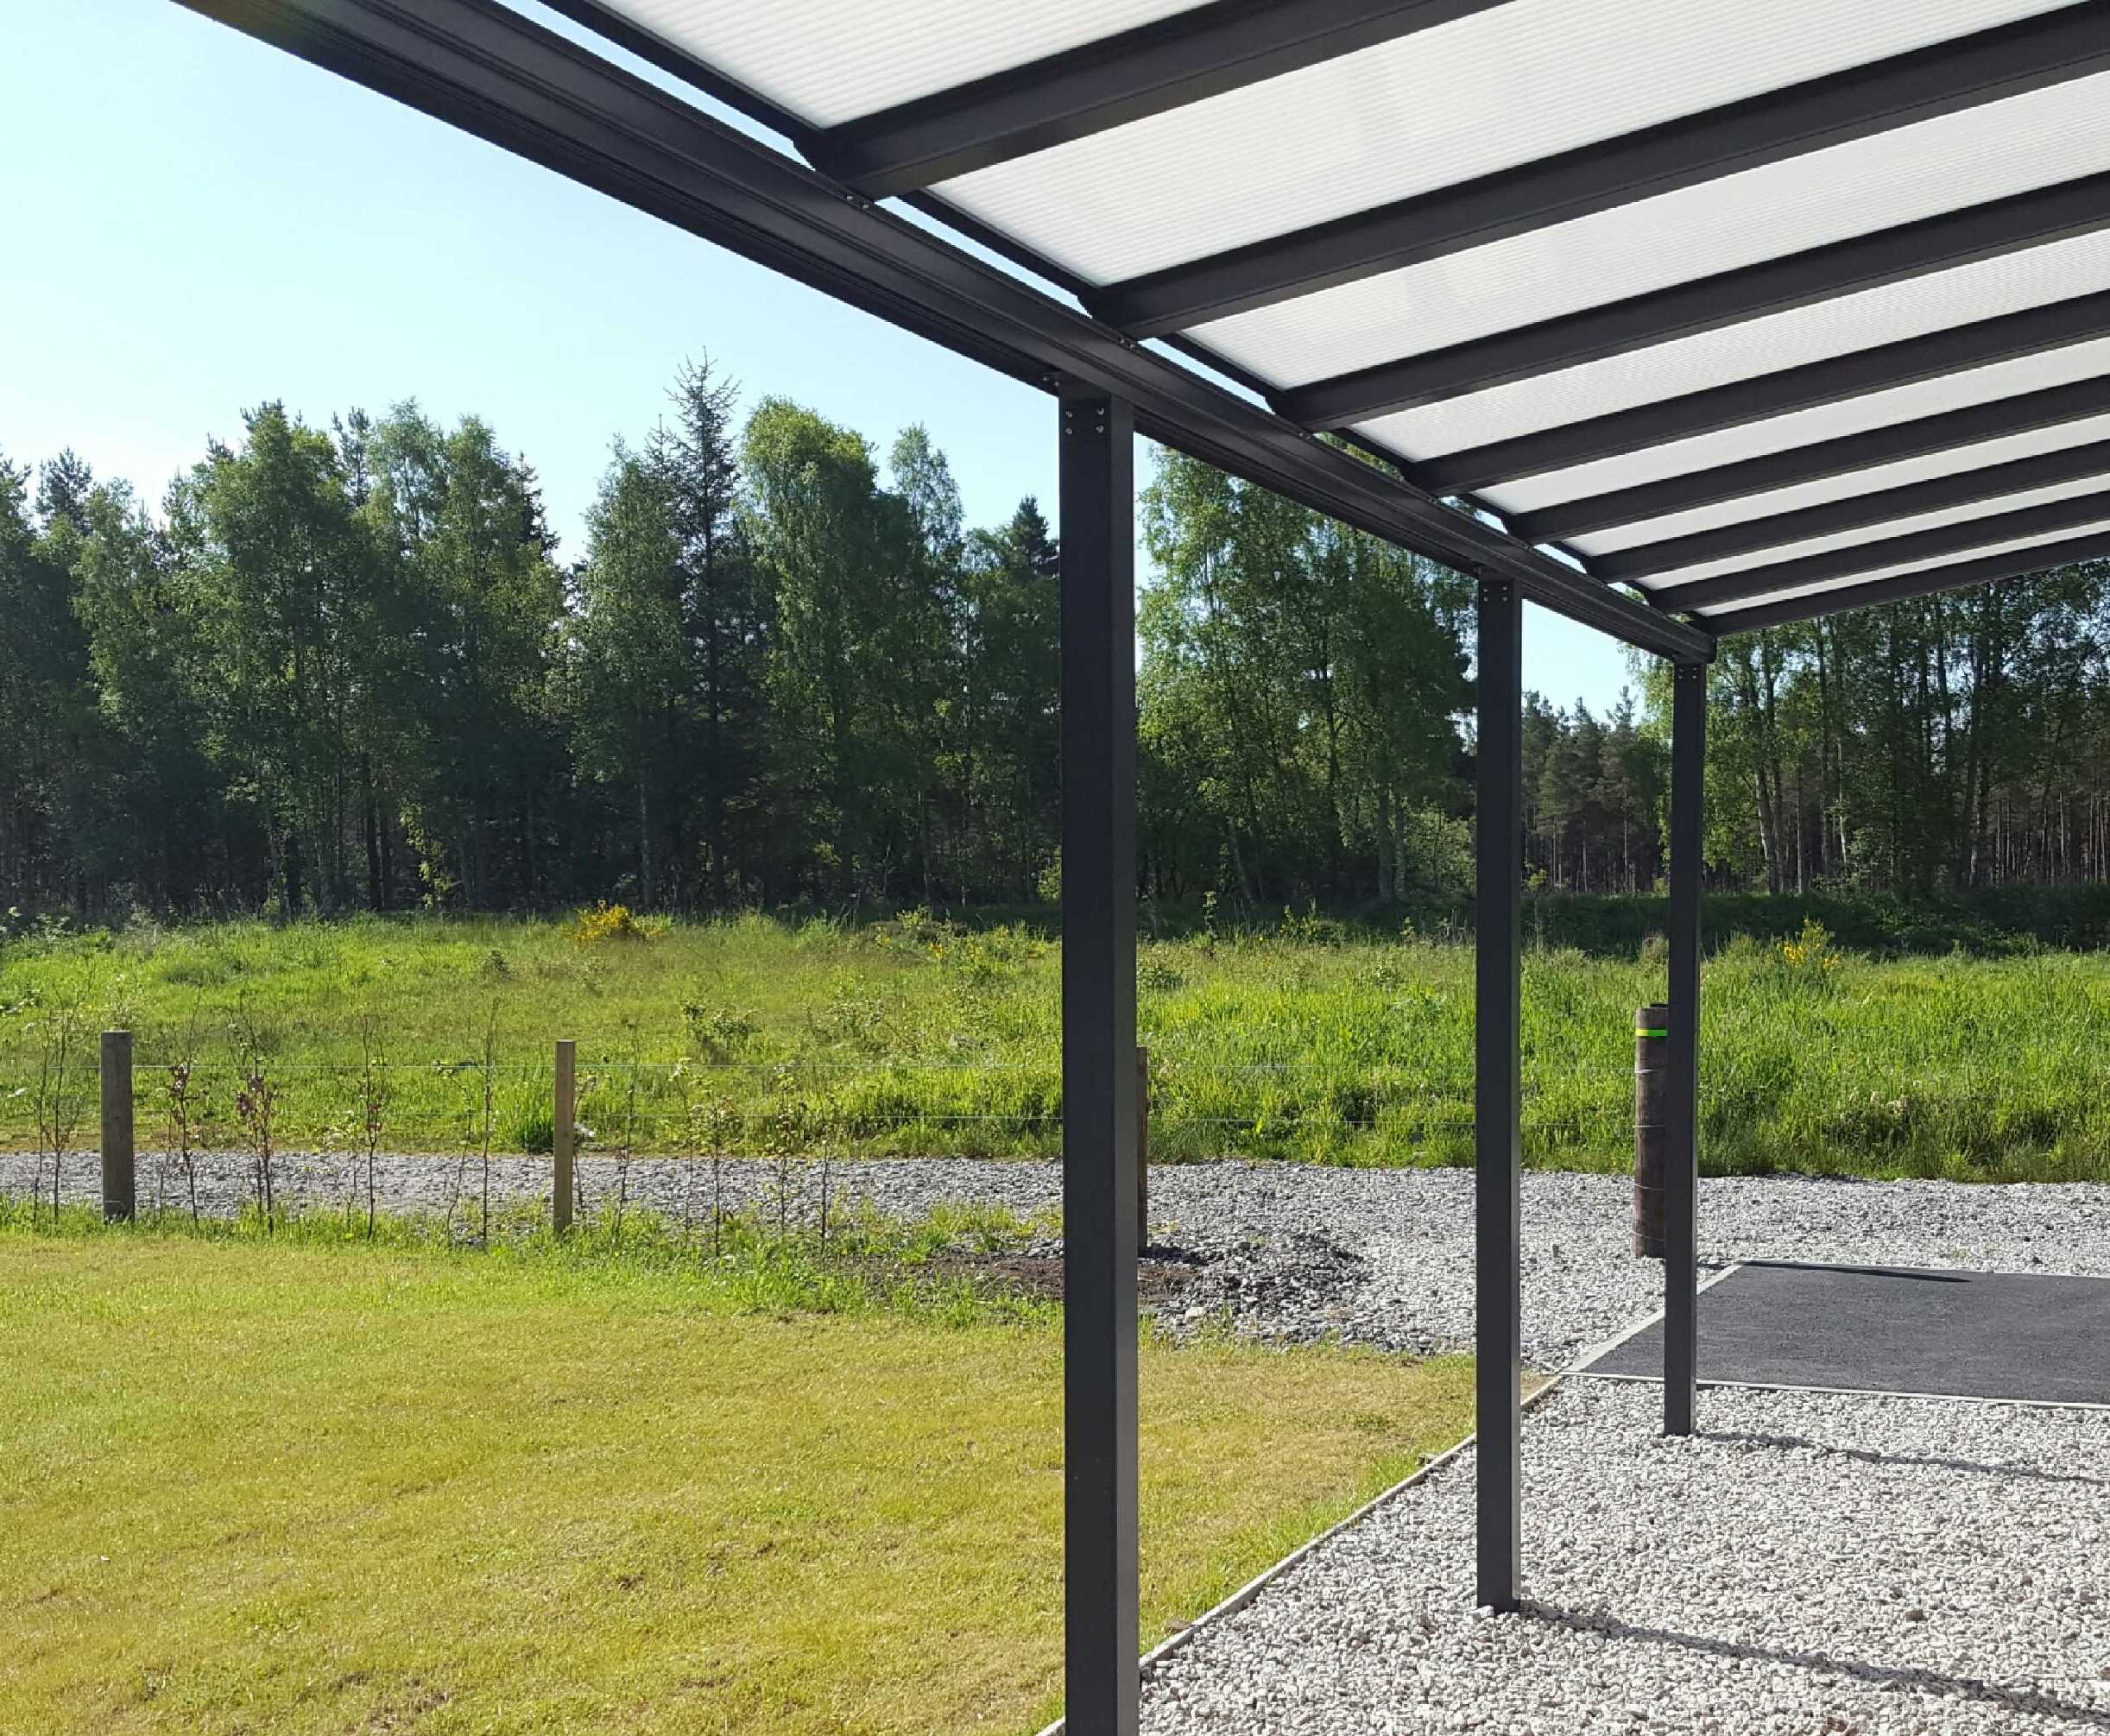 Omega Smart Lean-To Canopy, Anthracite Grey, UNGLAZED for 6mm Glazing - 10.5m (W) x 1.5m (P), (5) Supporting Posts